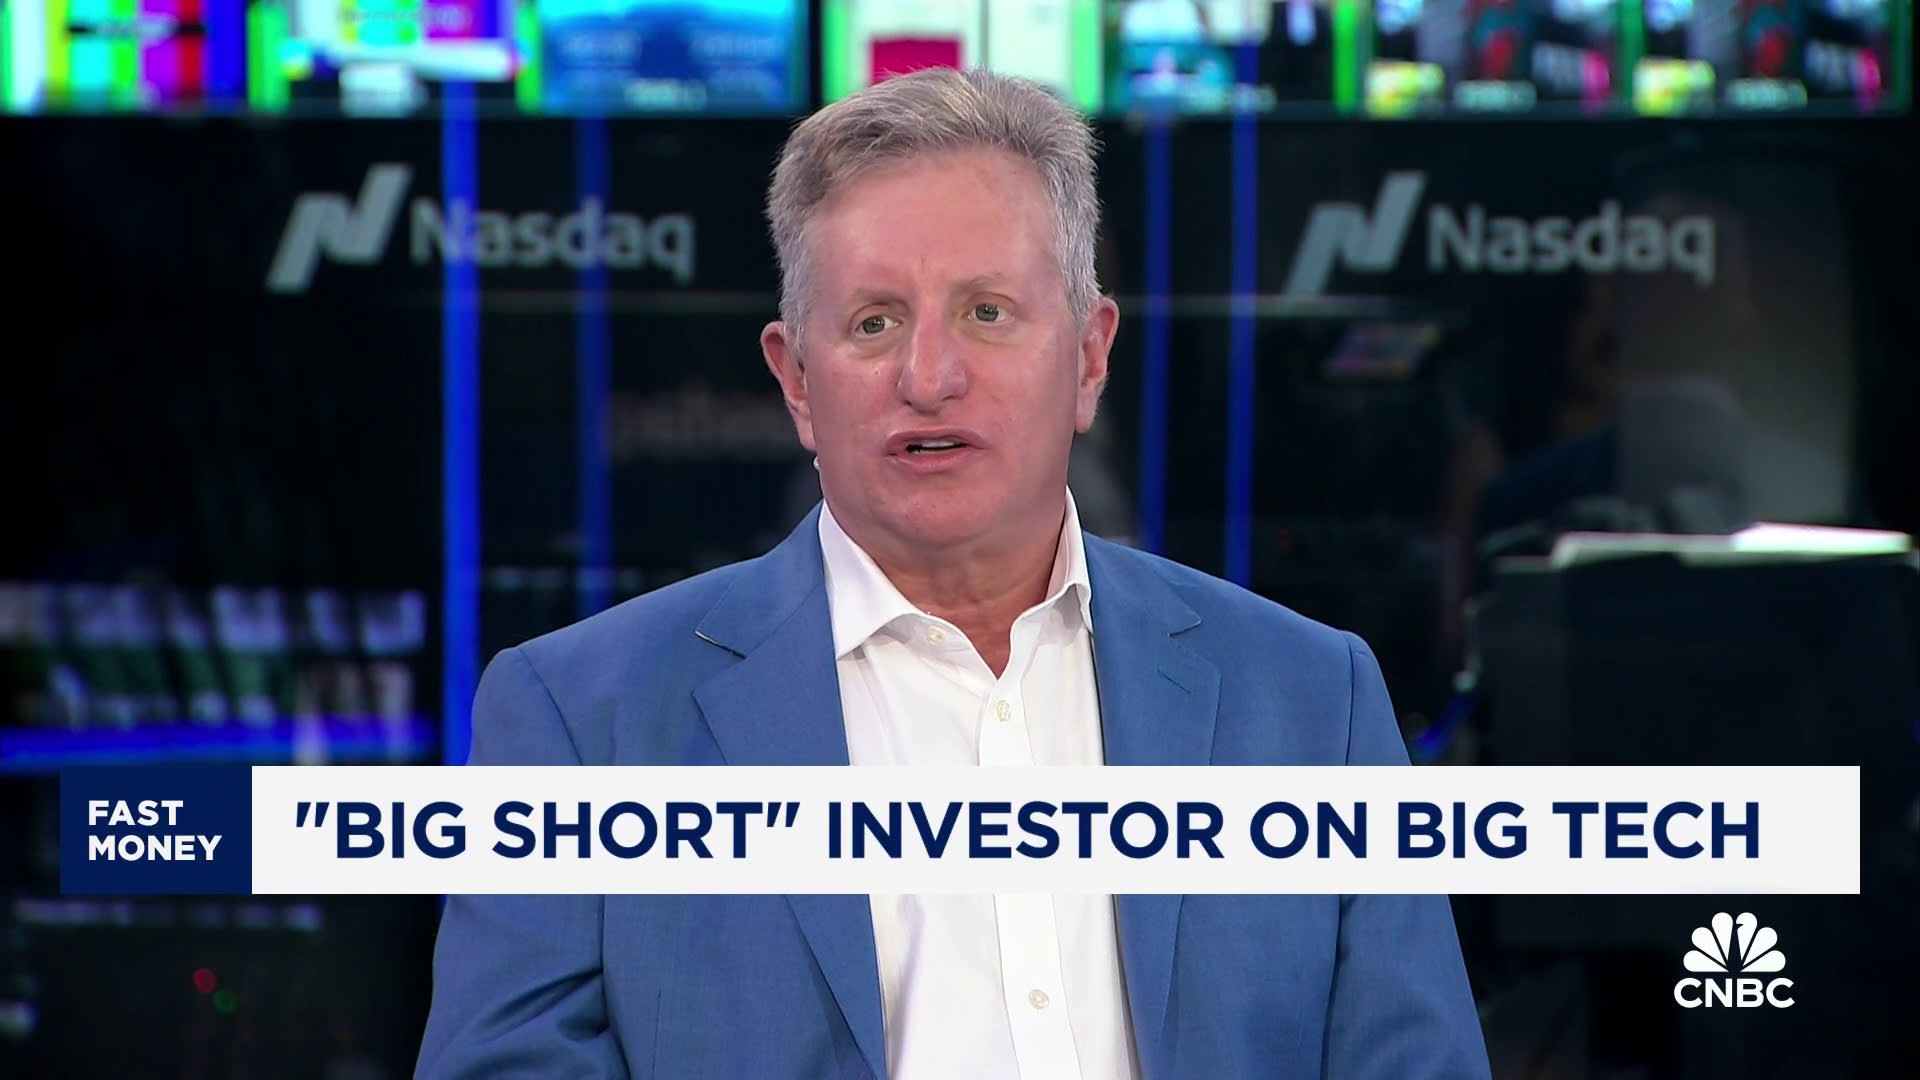 Sell-off in Big Tech is a ‘psychological rotation’, says Neuberger Berman’s Steve Eisman [Video]